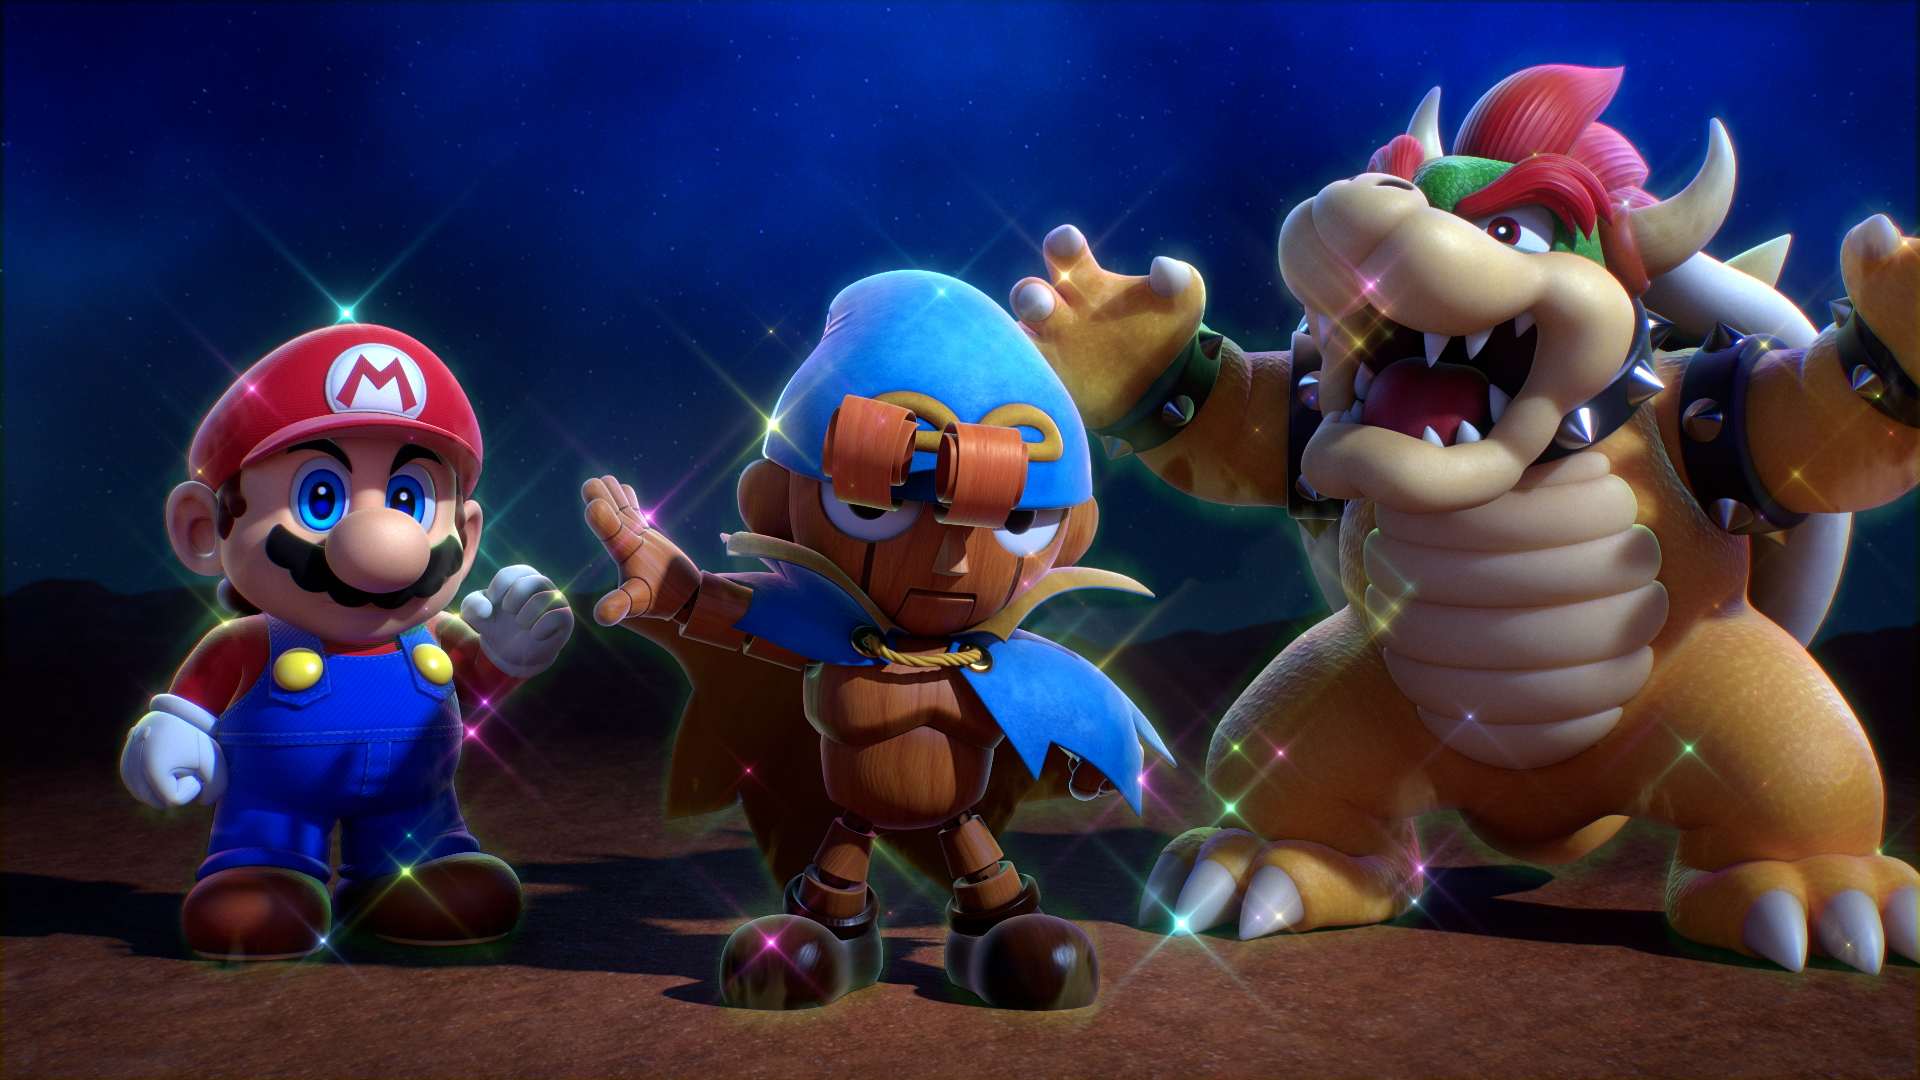 Mario, Geno, and Bowser stand in a line while sparkling in Super Mario RPG